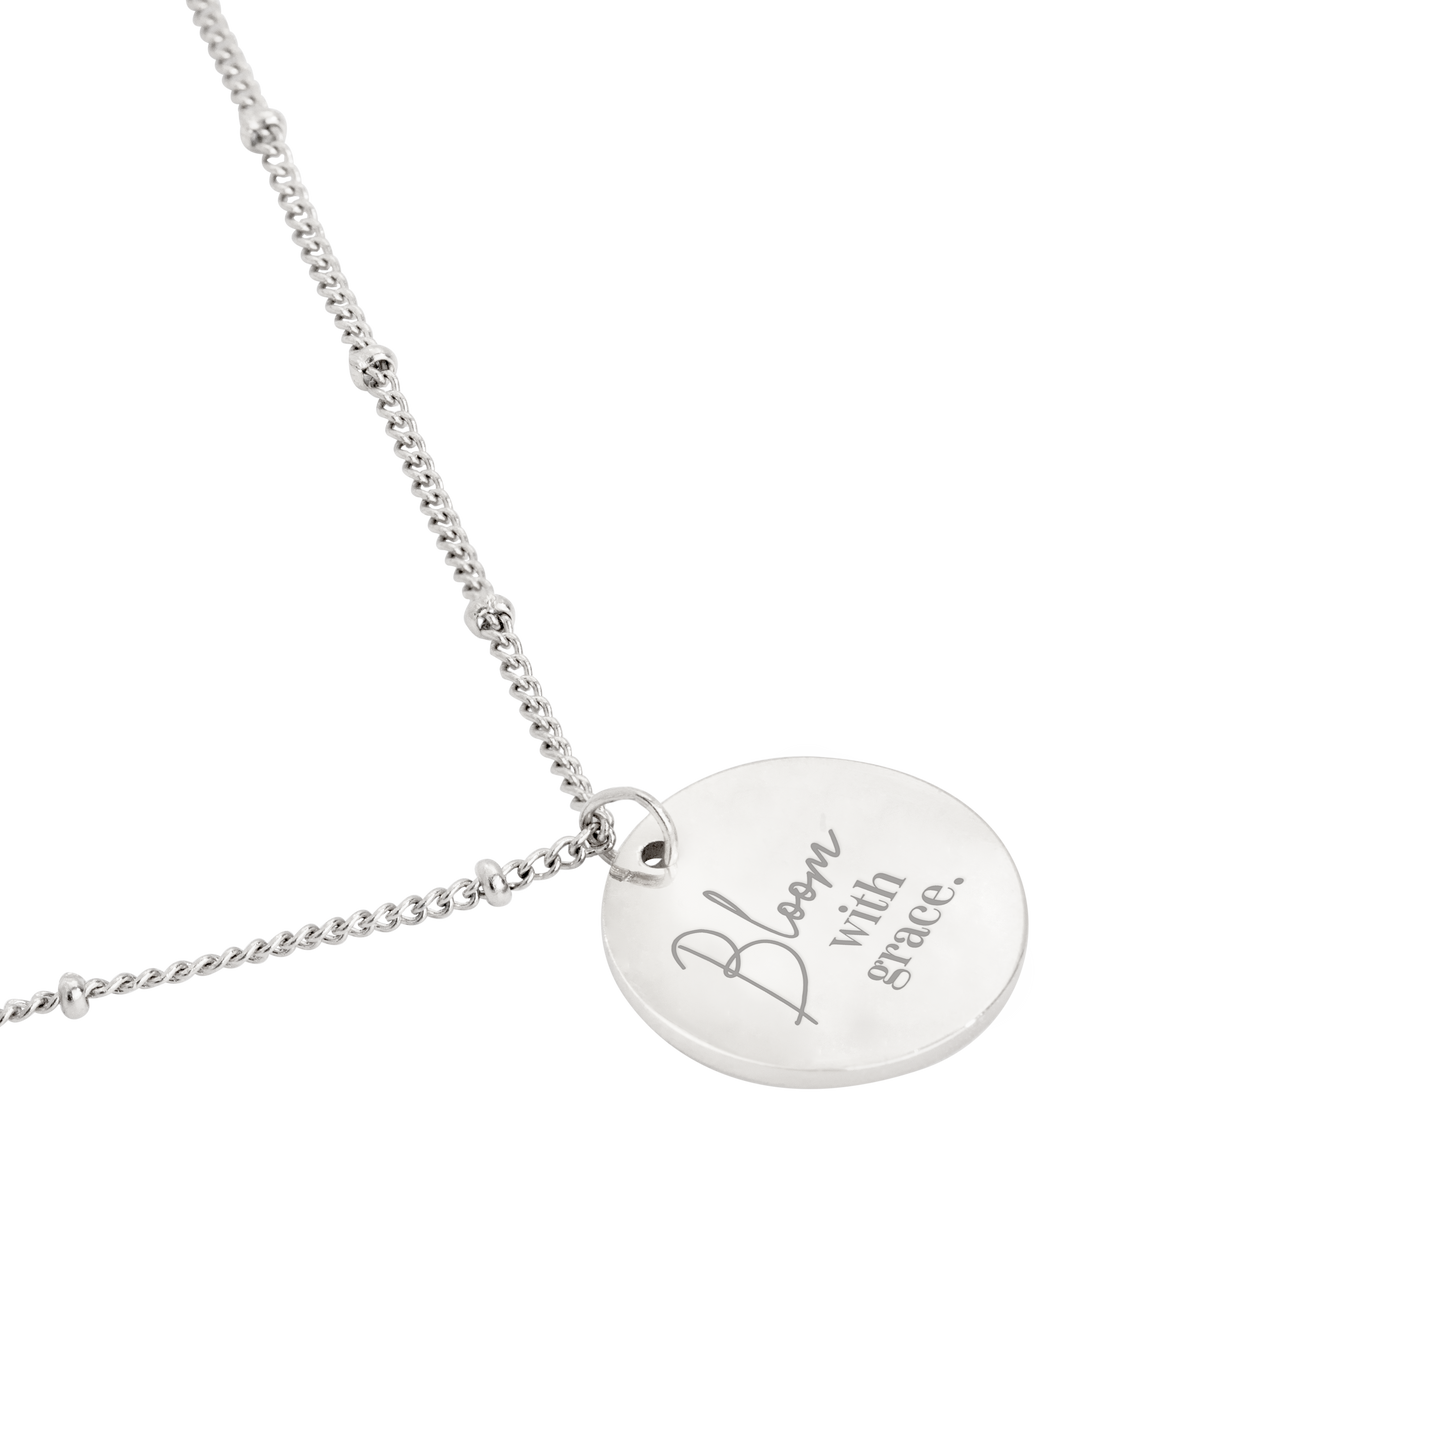 Bloom with grace Necklace Silver